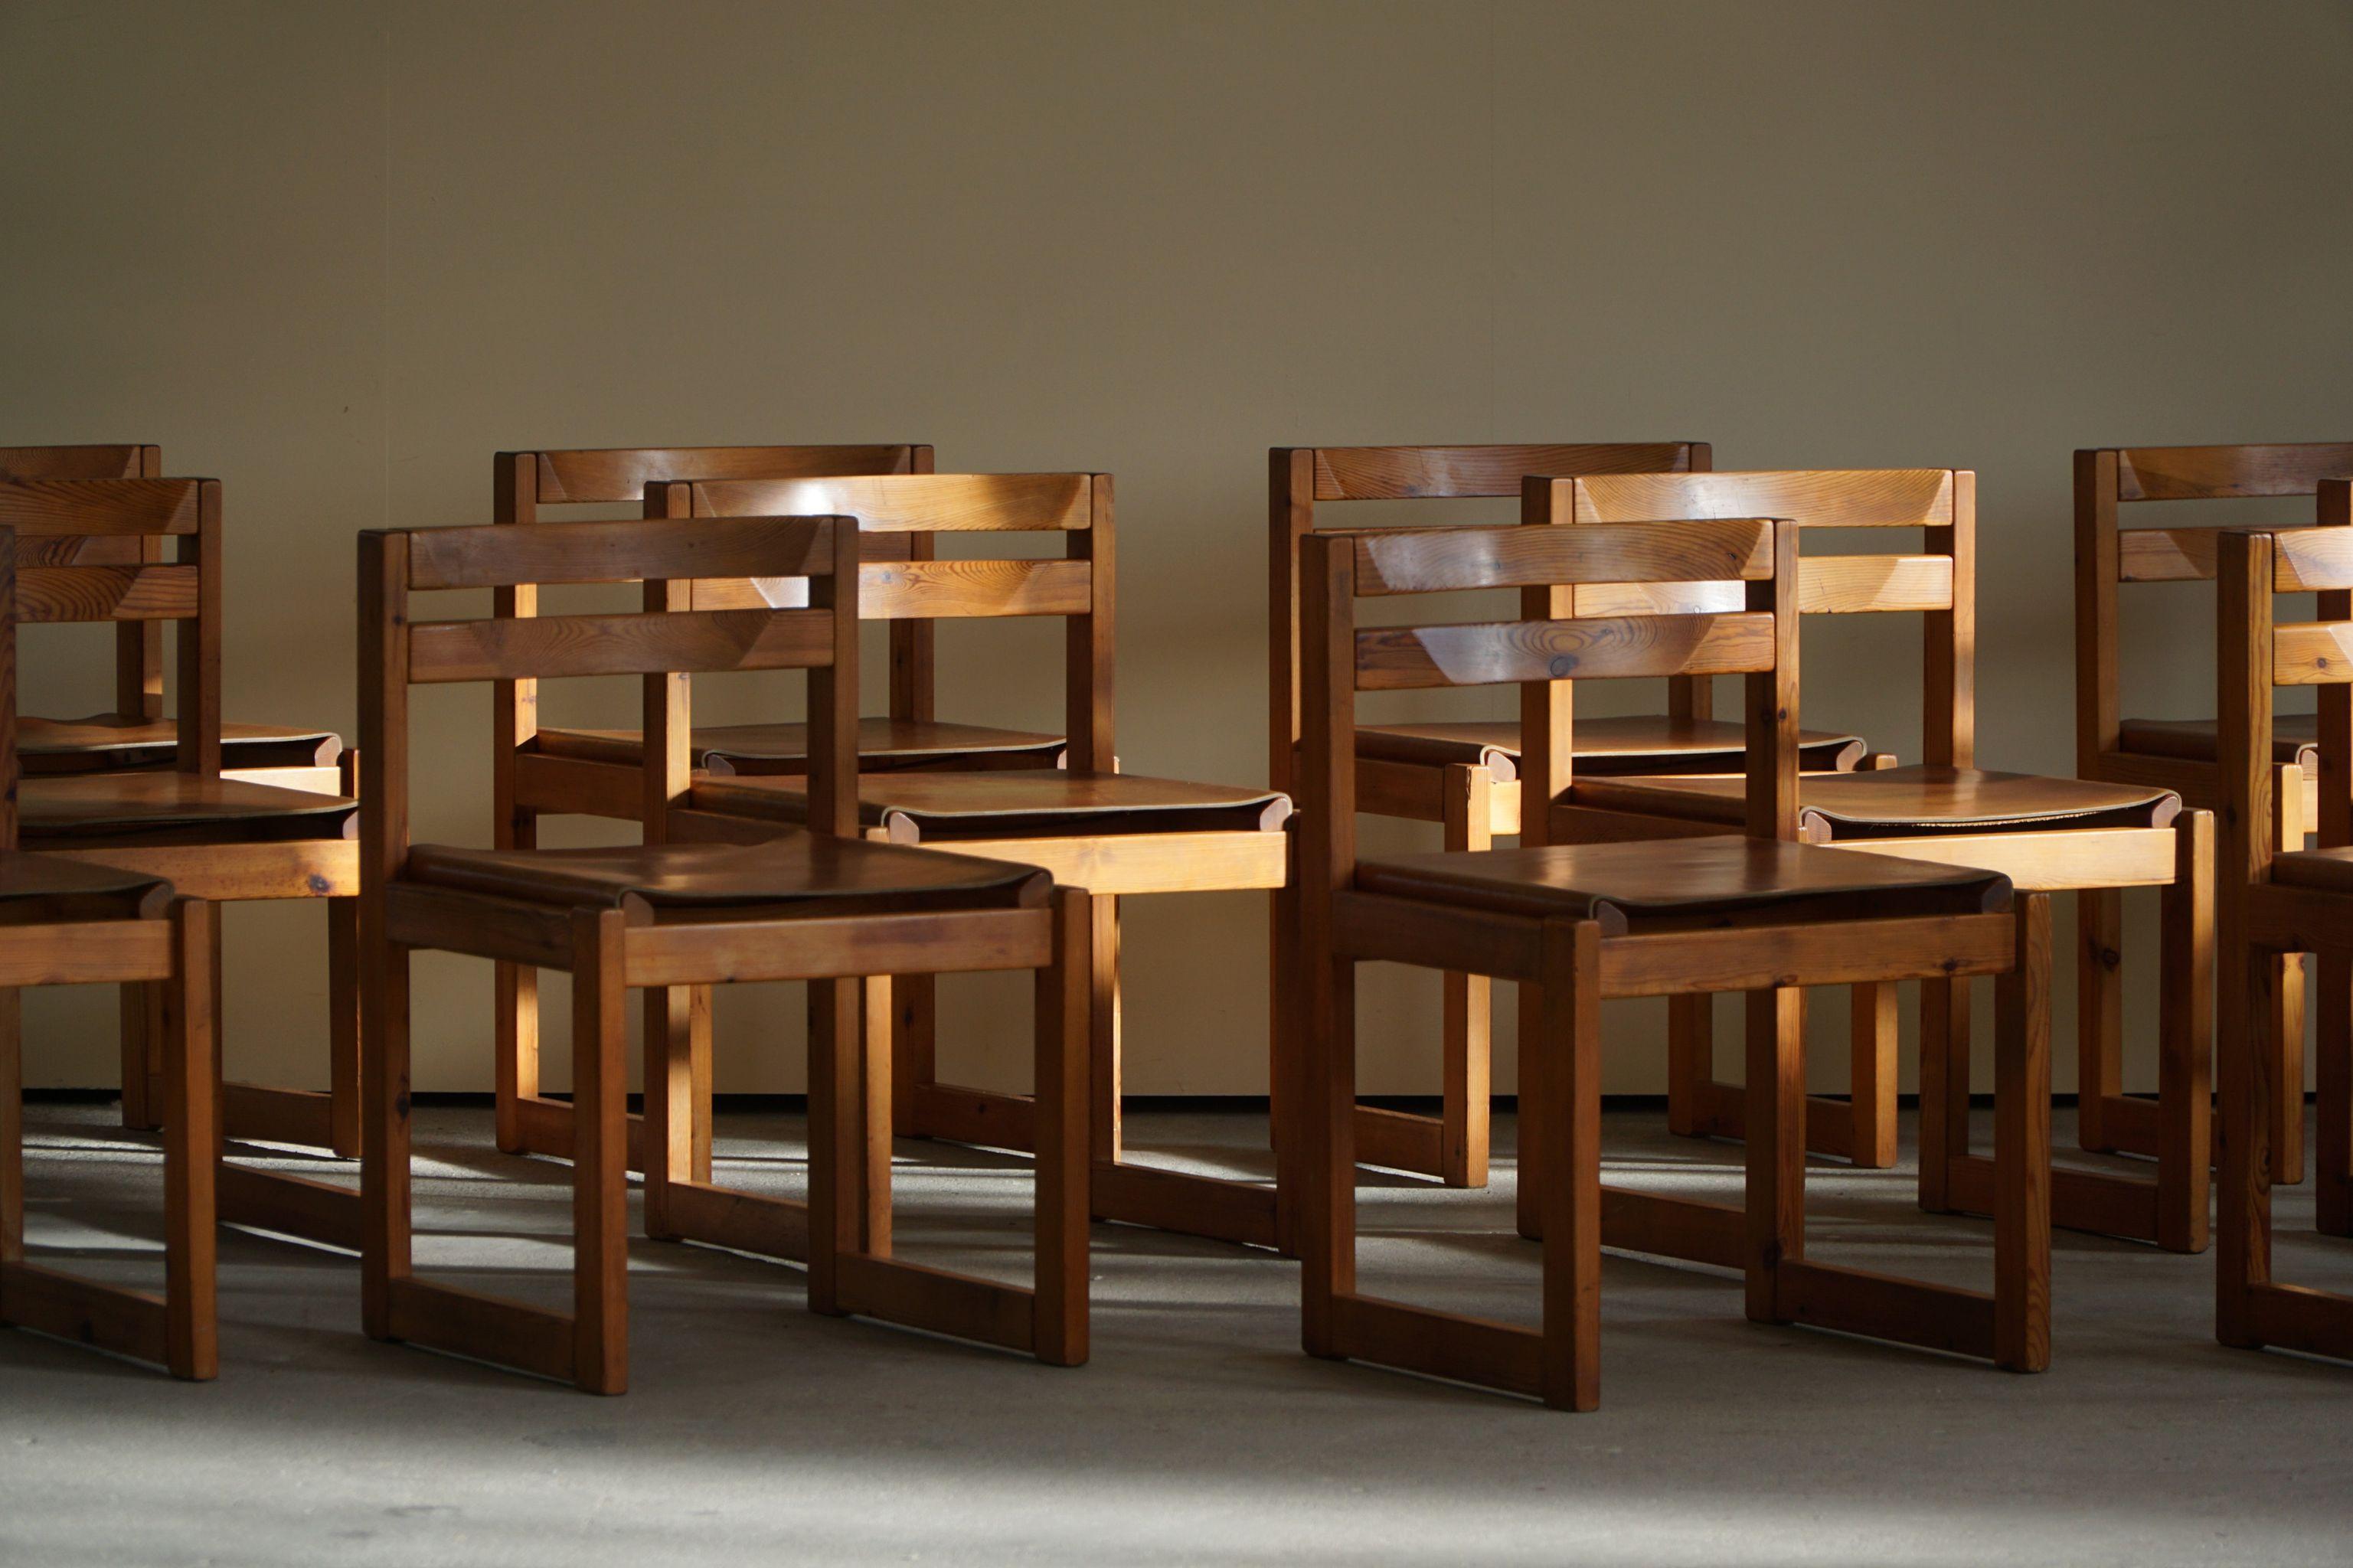 Danish mid-century dining chairs in pine and leather, made by Knud Færch for Sorø Møbelfabrik in 1970s, set of 12. 

The set is in a overall great vintage condition. The wooden frame has a warm patina and the leather is without any visible